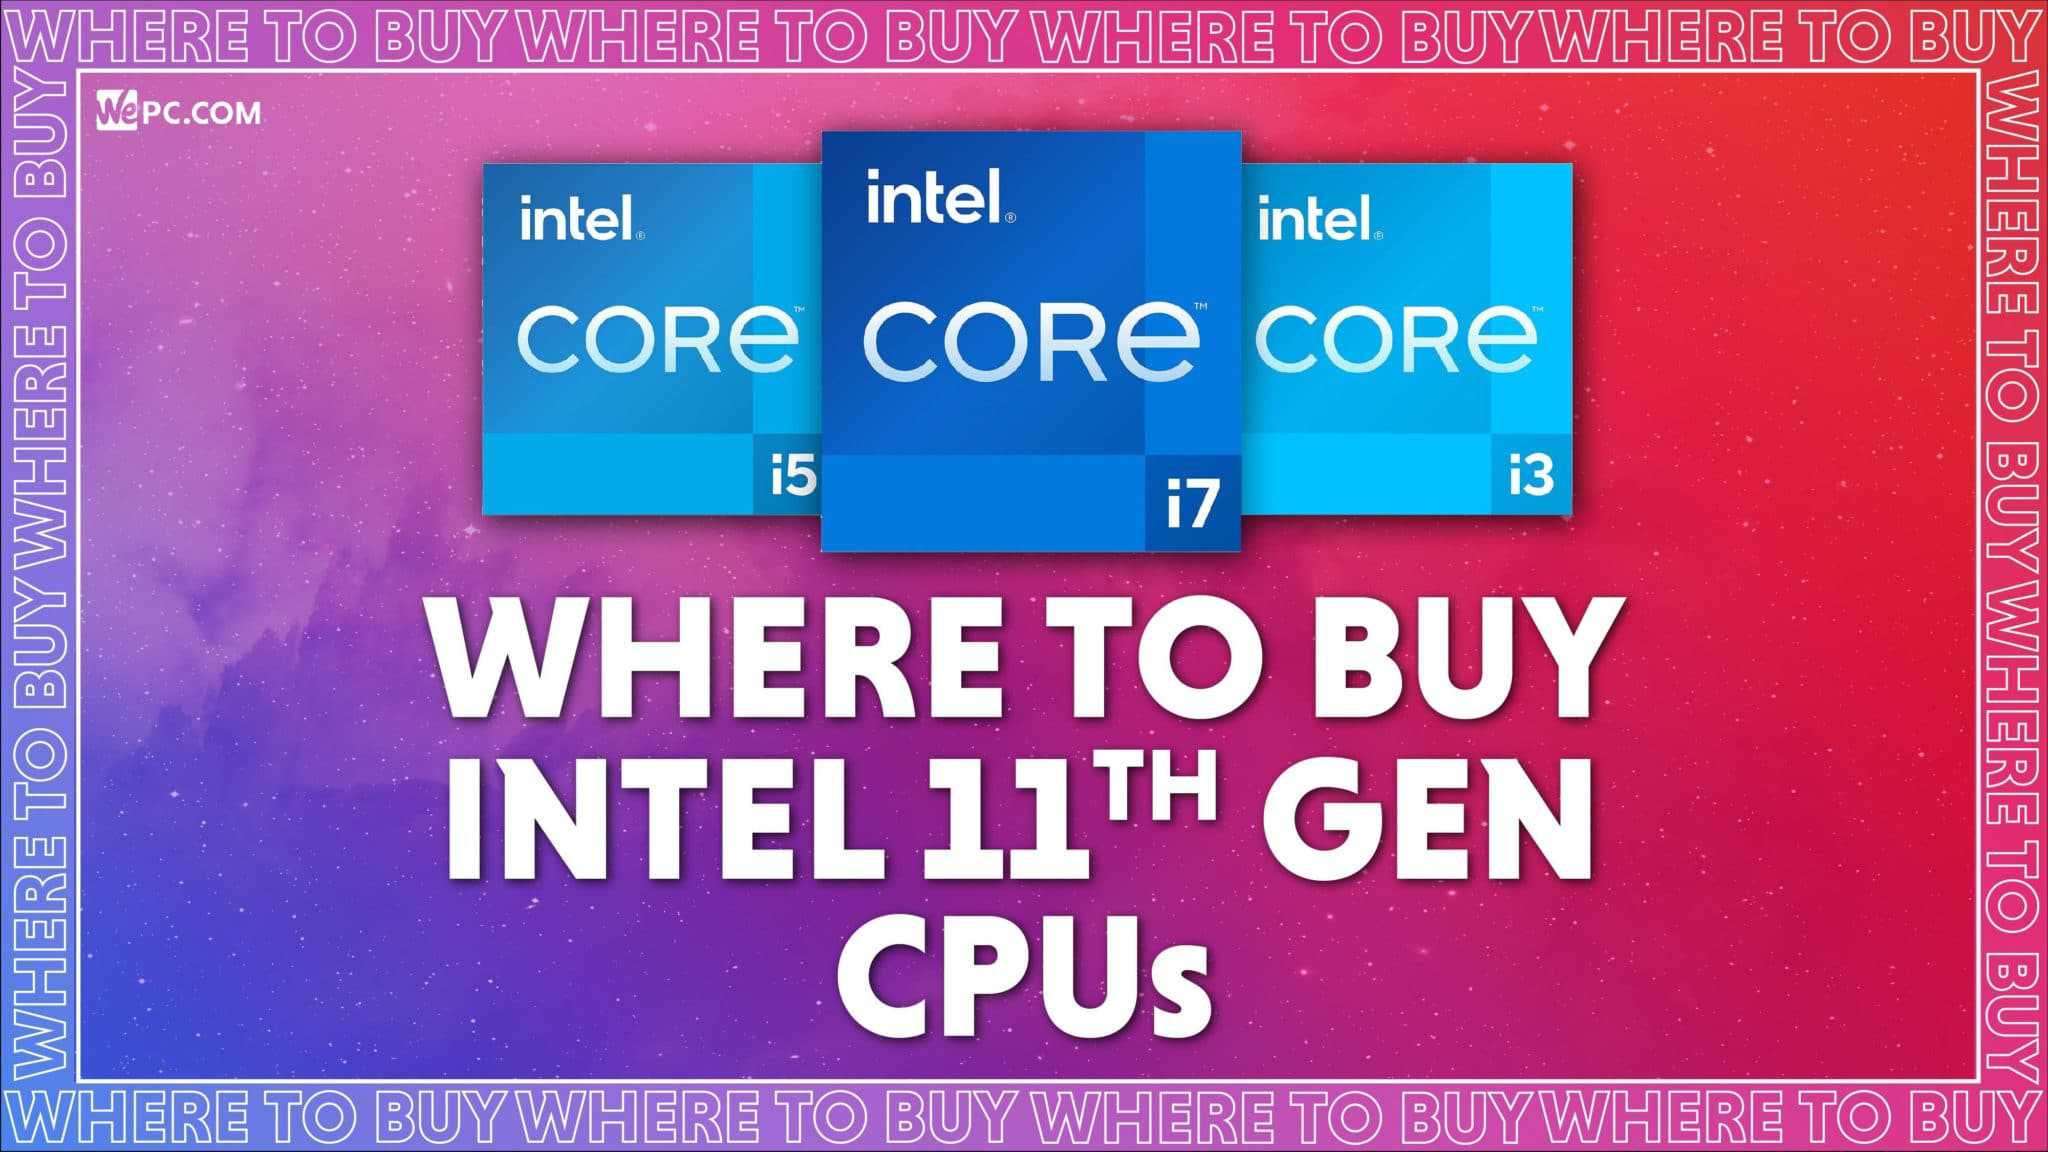 WePC Where to buy 11th gen CPUs 01